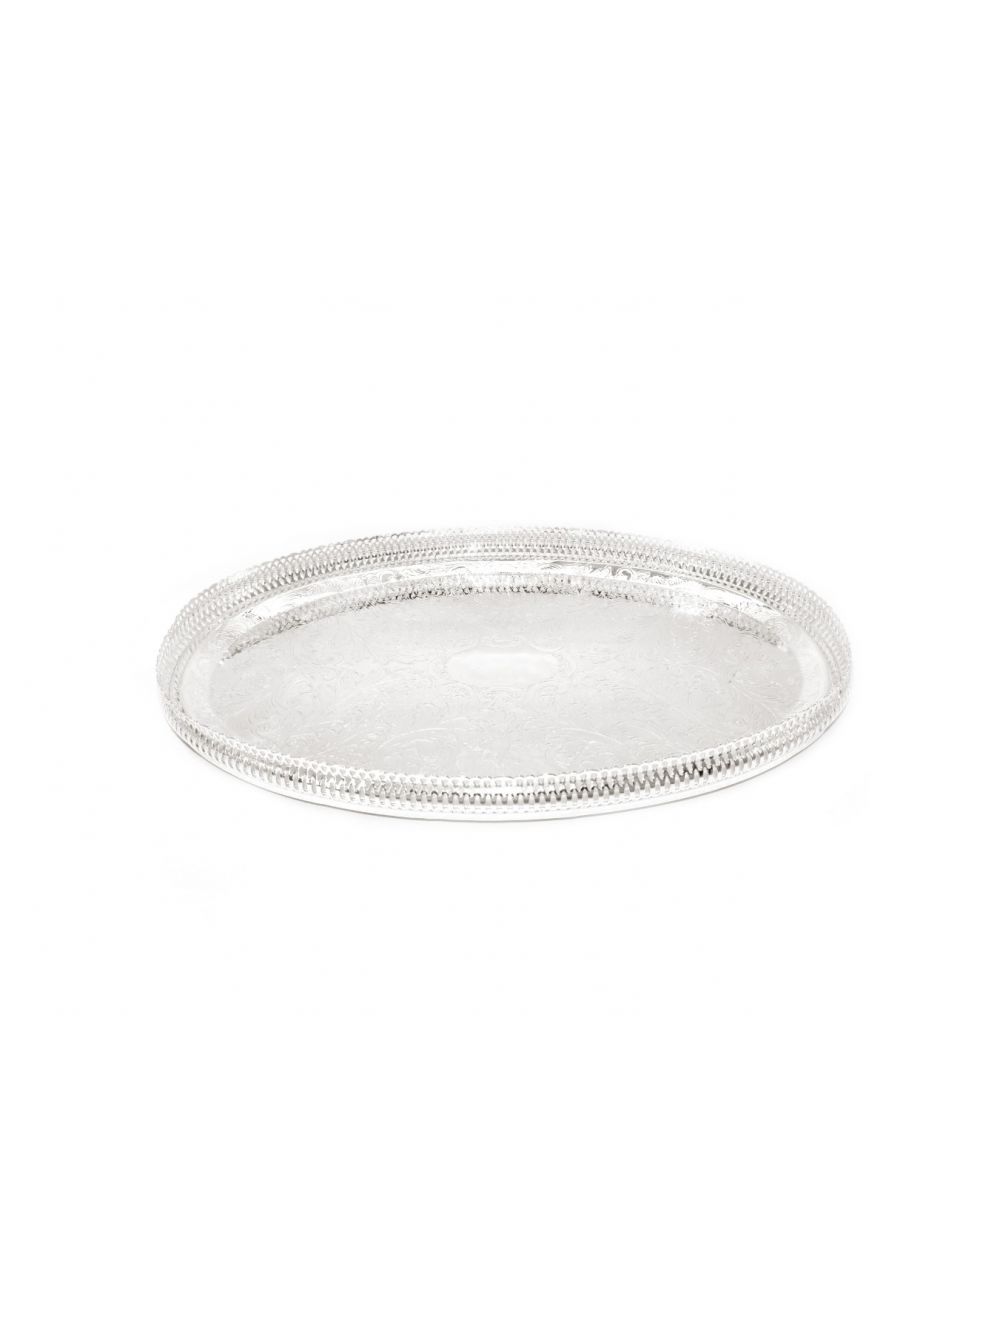 Silver Plated Oval Gallery Tray